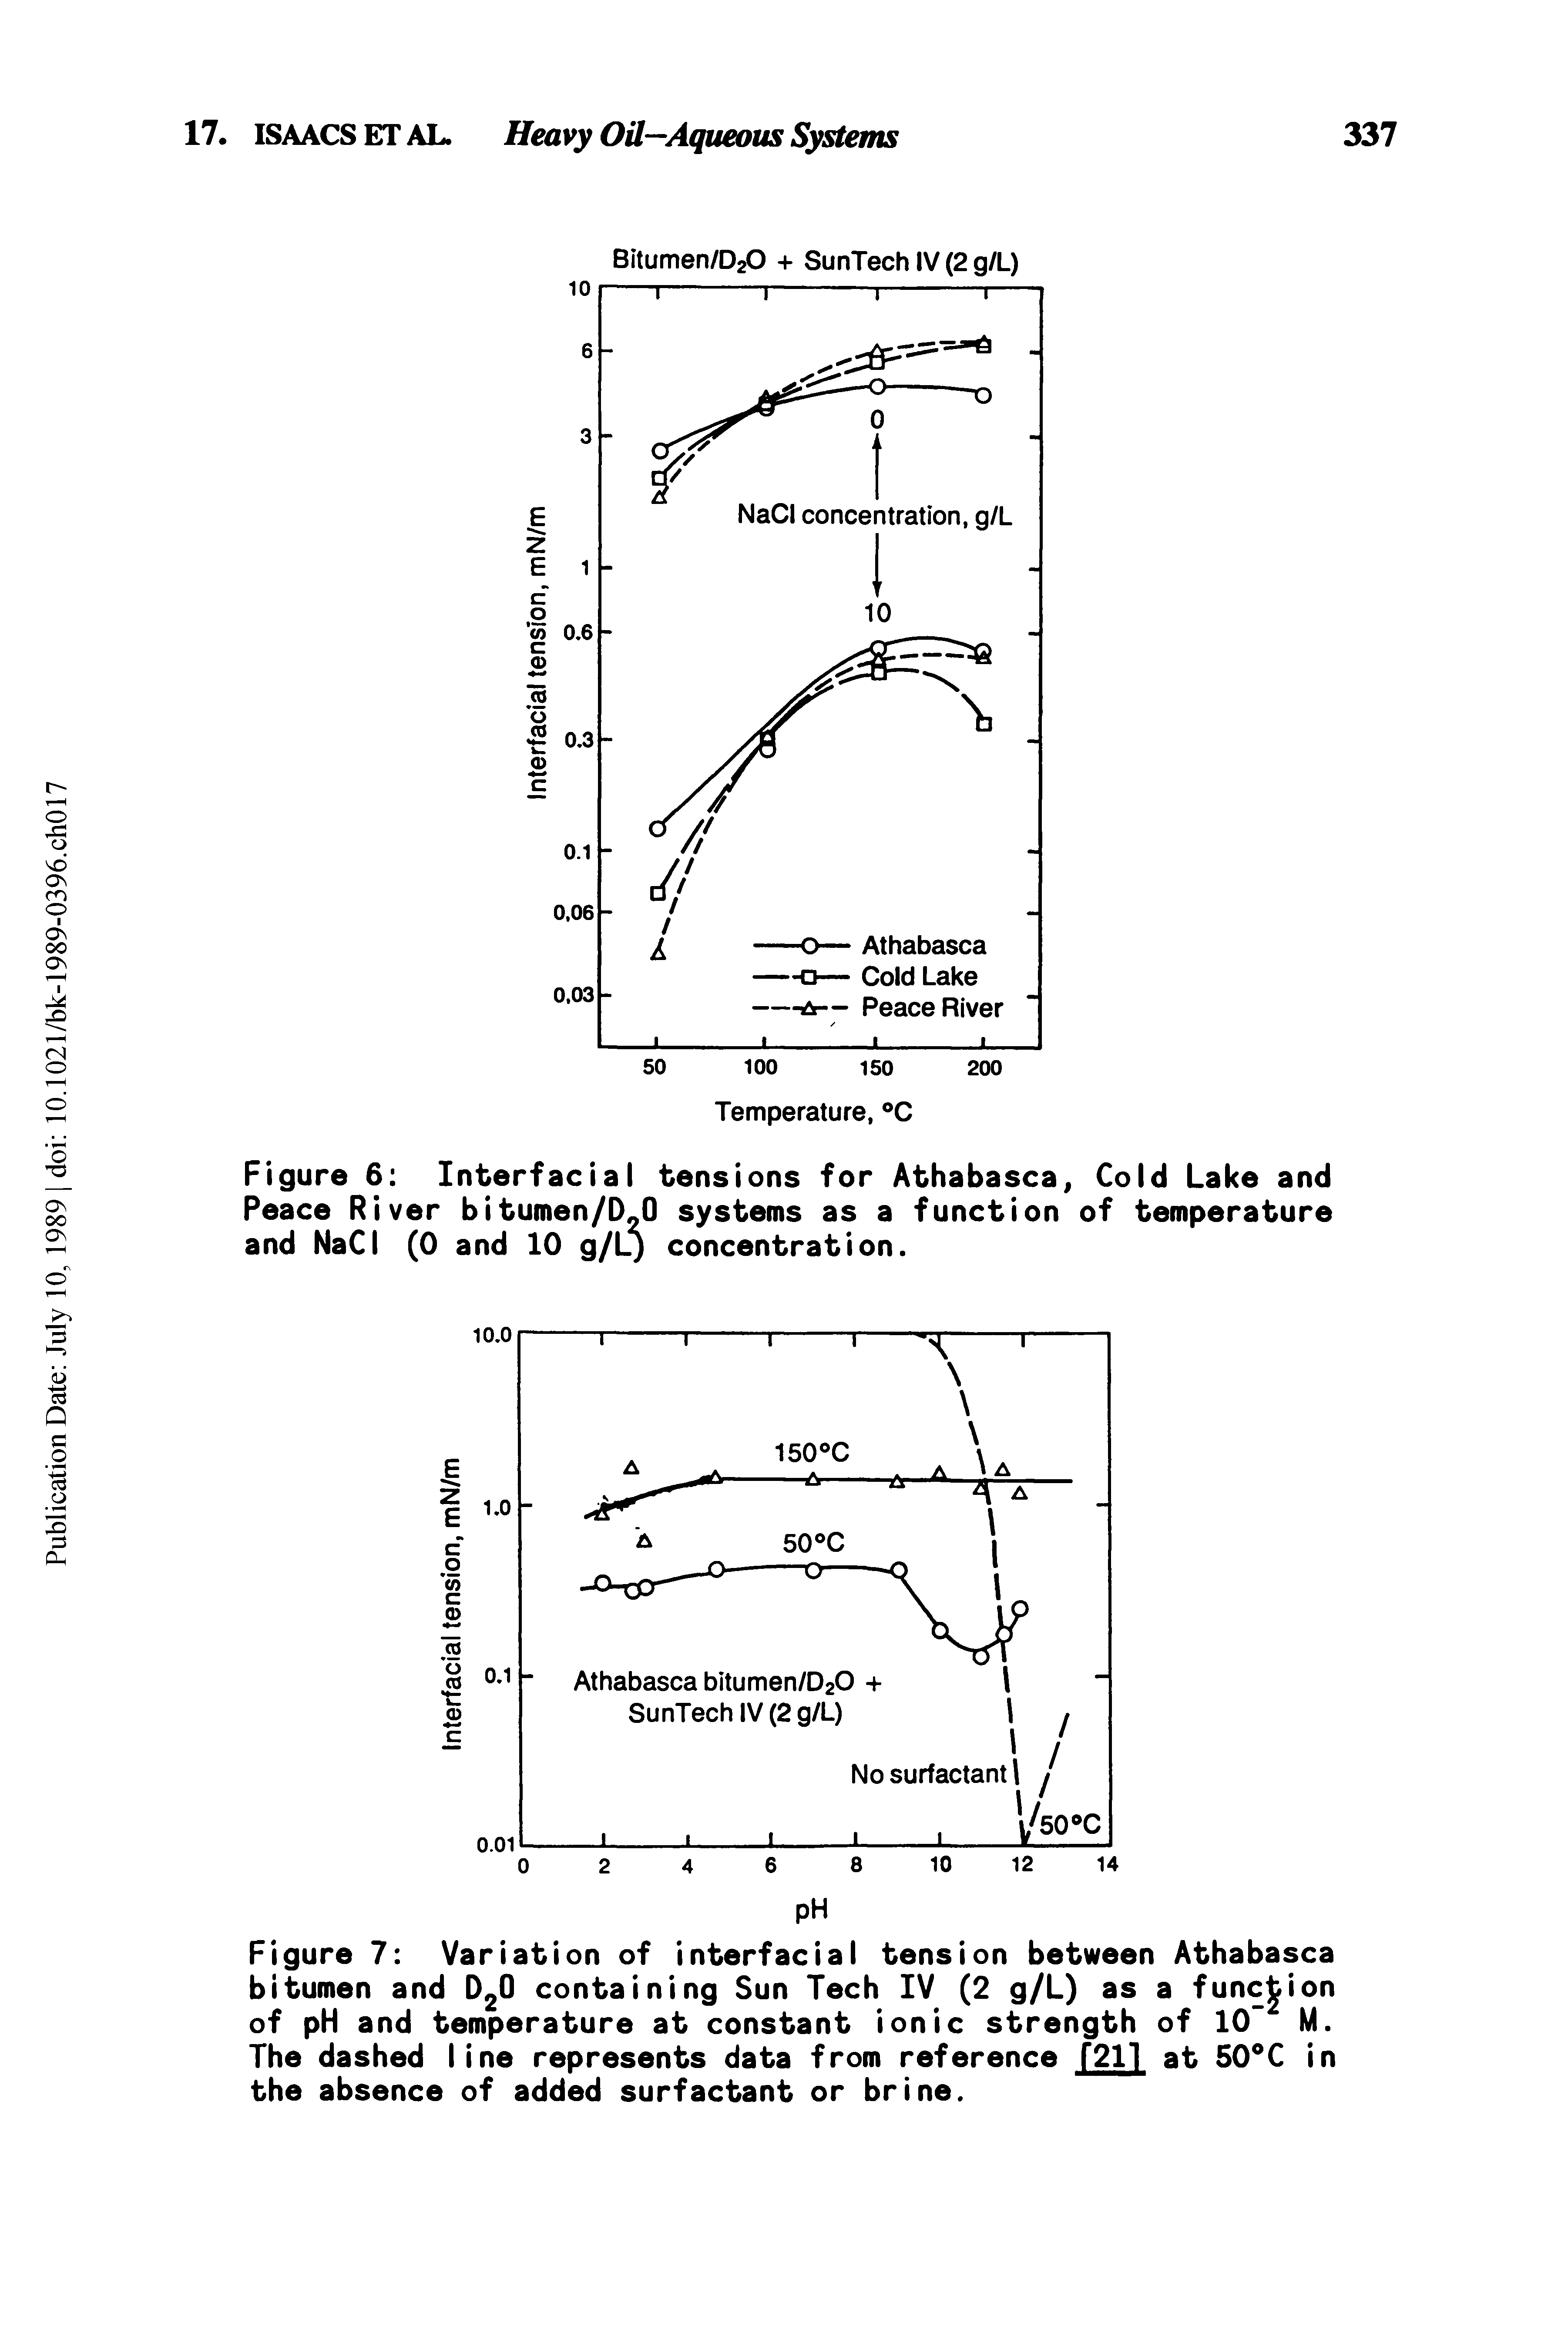 Figure 6 Interfacial tensions for Athabasca, Cold Lake and Peace River bitumen/DJ) systems as a function of temperature and NaCI (0 and 10 g/L) concentration.